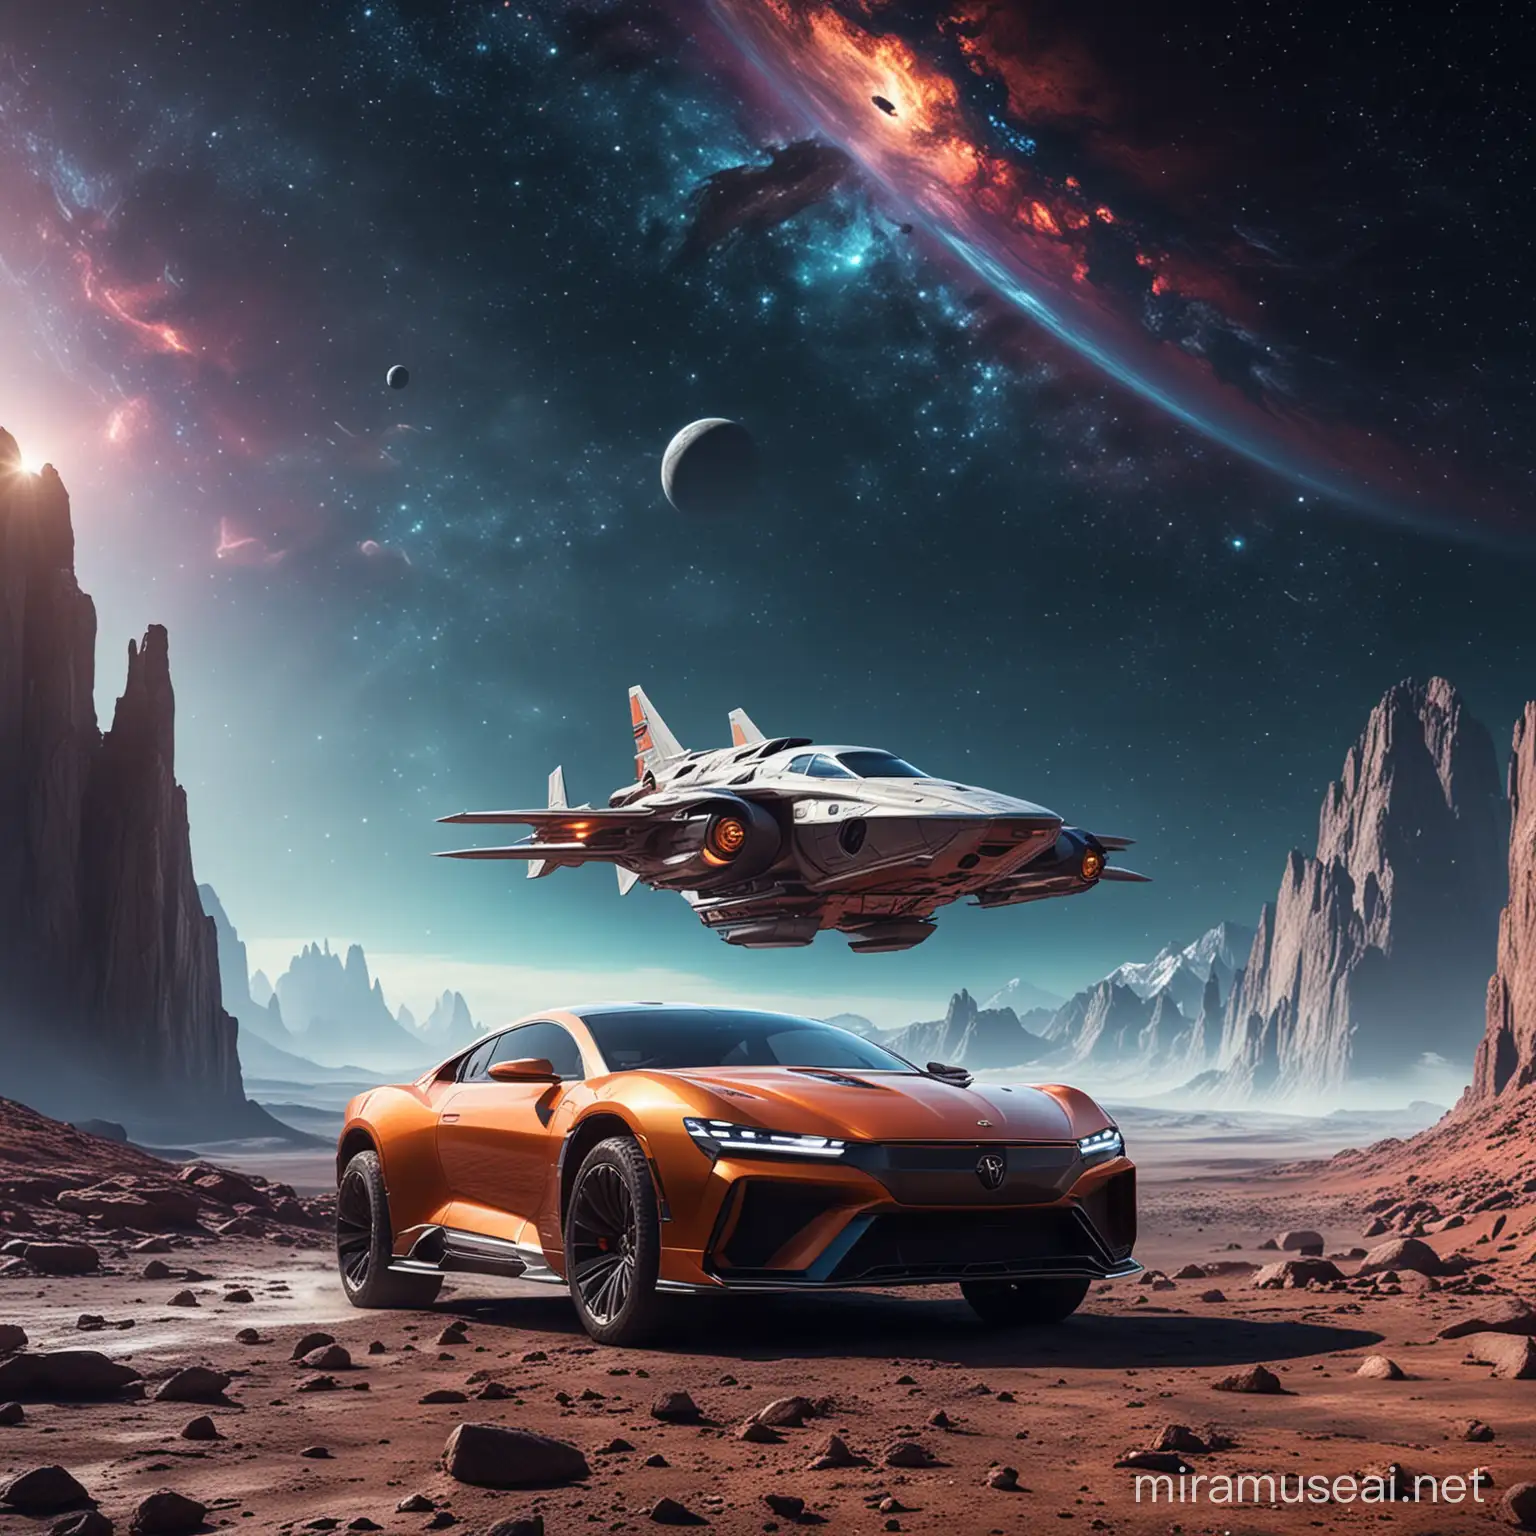 Luxury Car Adrift in a Vivid Cosmos with Distant Spaceship and Rocky Terrain